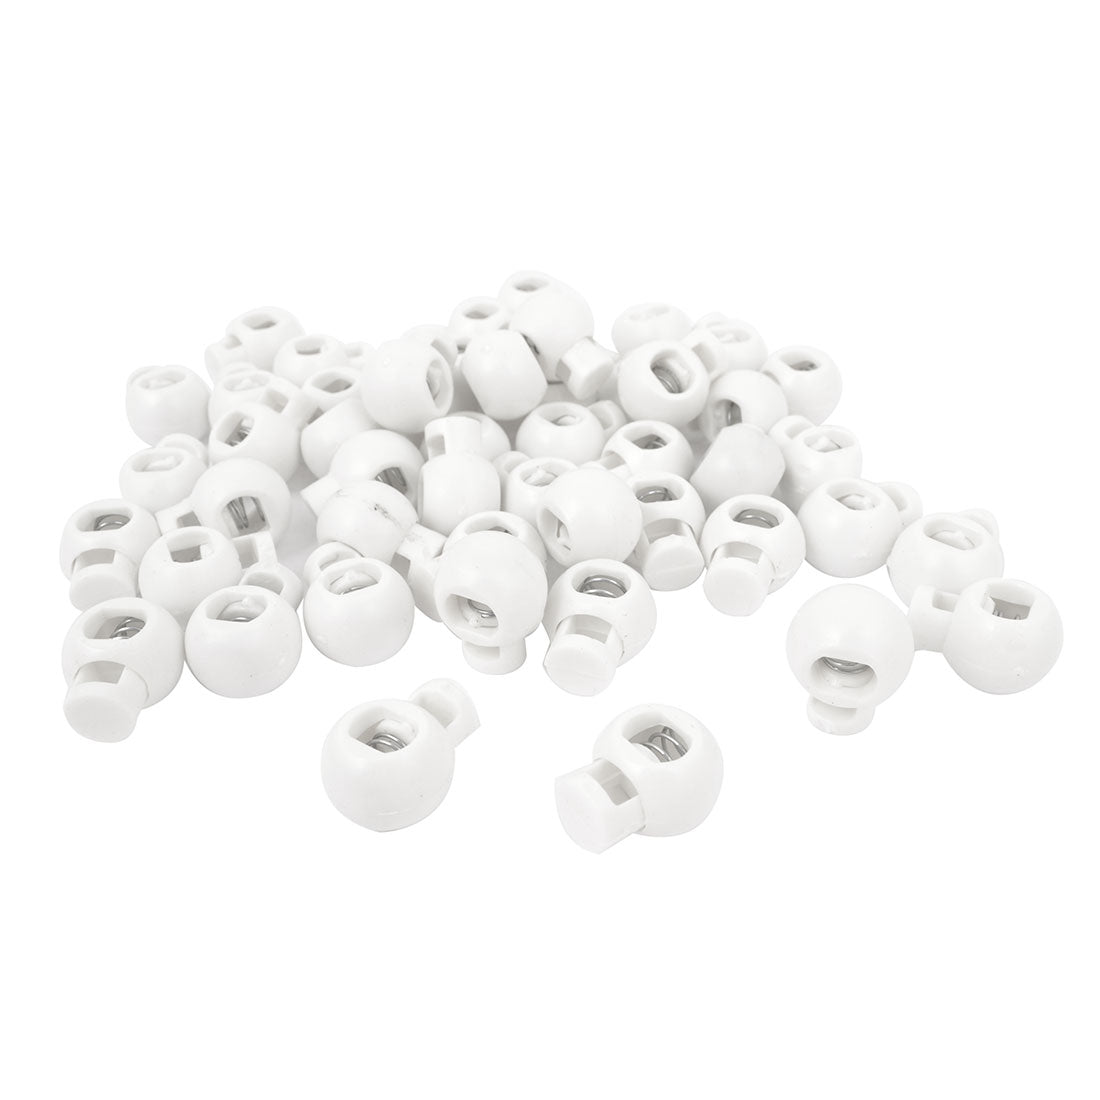 uxcell Uxcell Backpack Drawstring White Plastic 8mm x 6mm Single Hole Round Head Spring Cord Locks Toggles 50 Pcs